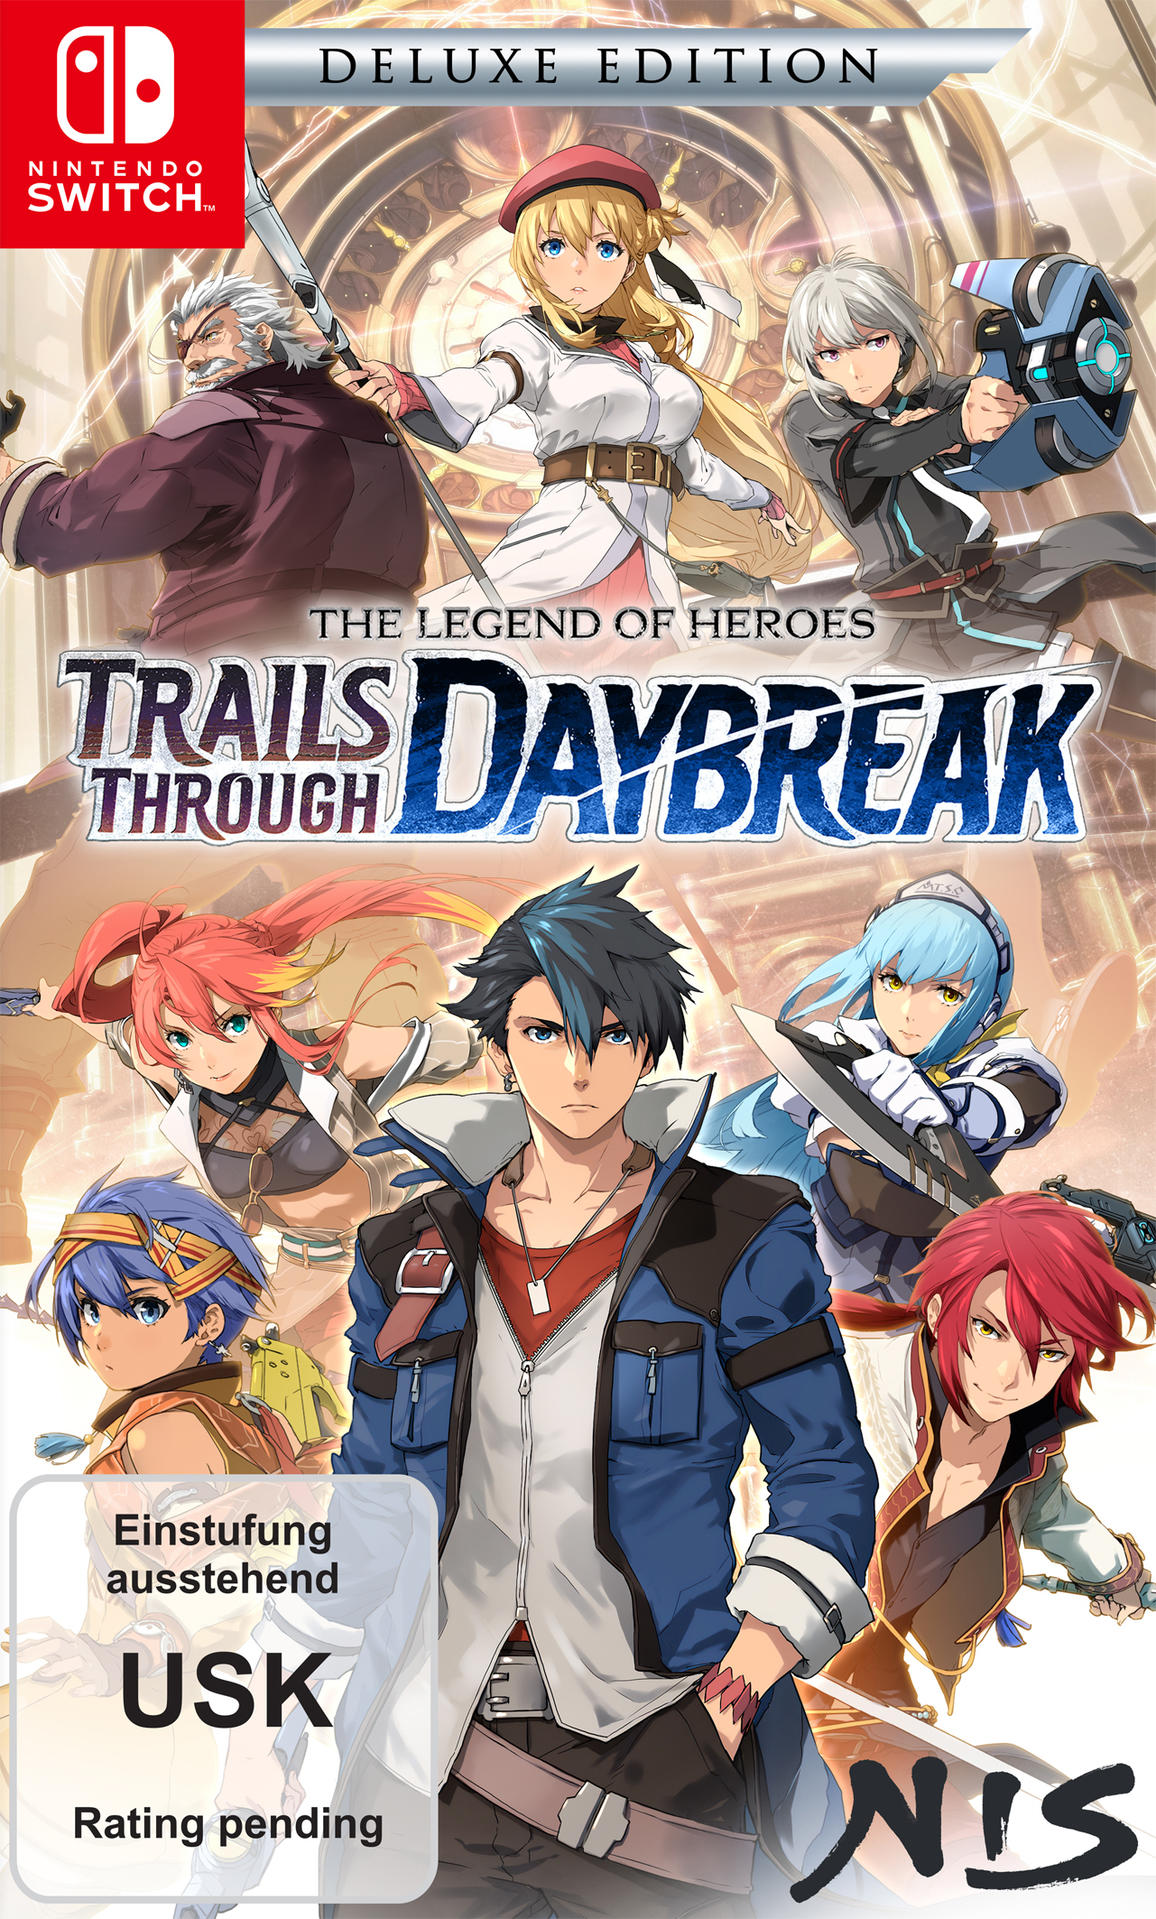 The Legend of Heroes: [Nintendo Deluxe - Daybreak Trails - Edition Switch] through